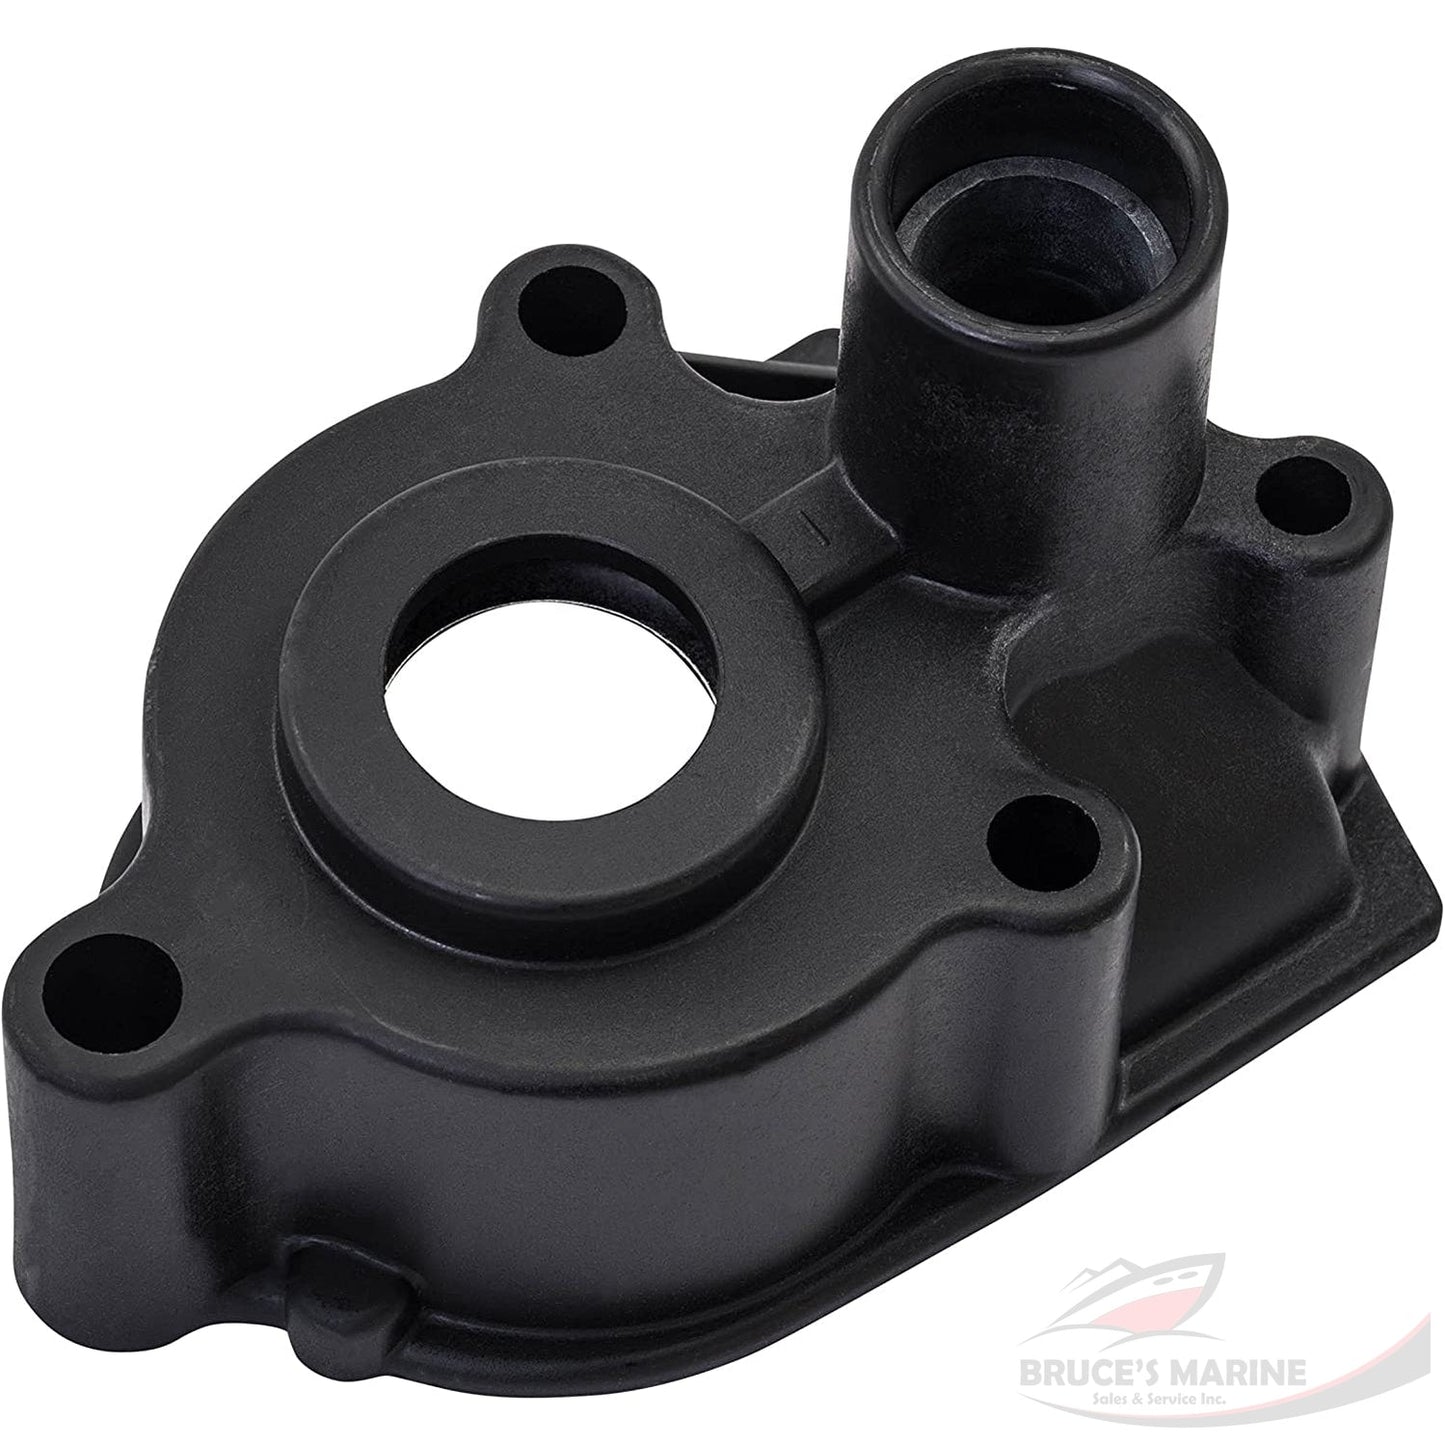 Quicksilver 46-96148Q 8 - Water Pump Kit, No Base - Mercury and Mariner Outboards and MerCruiser Stern Drives